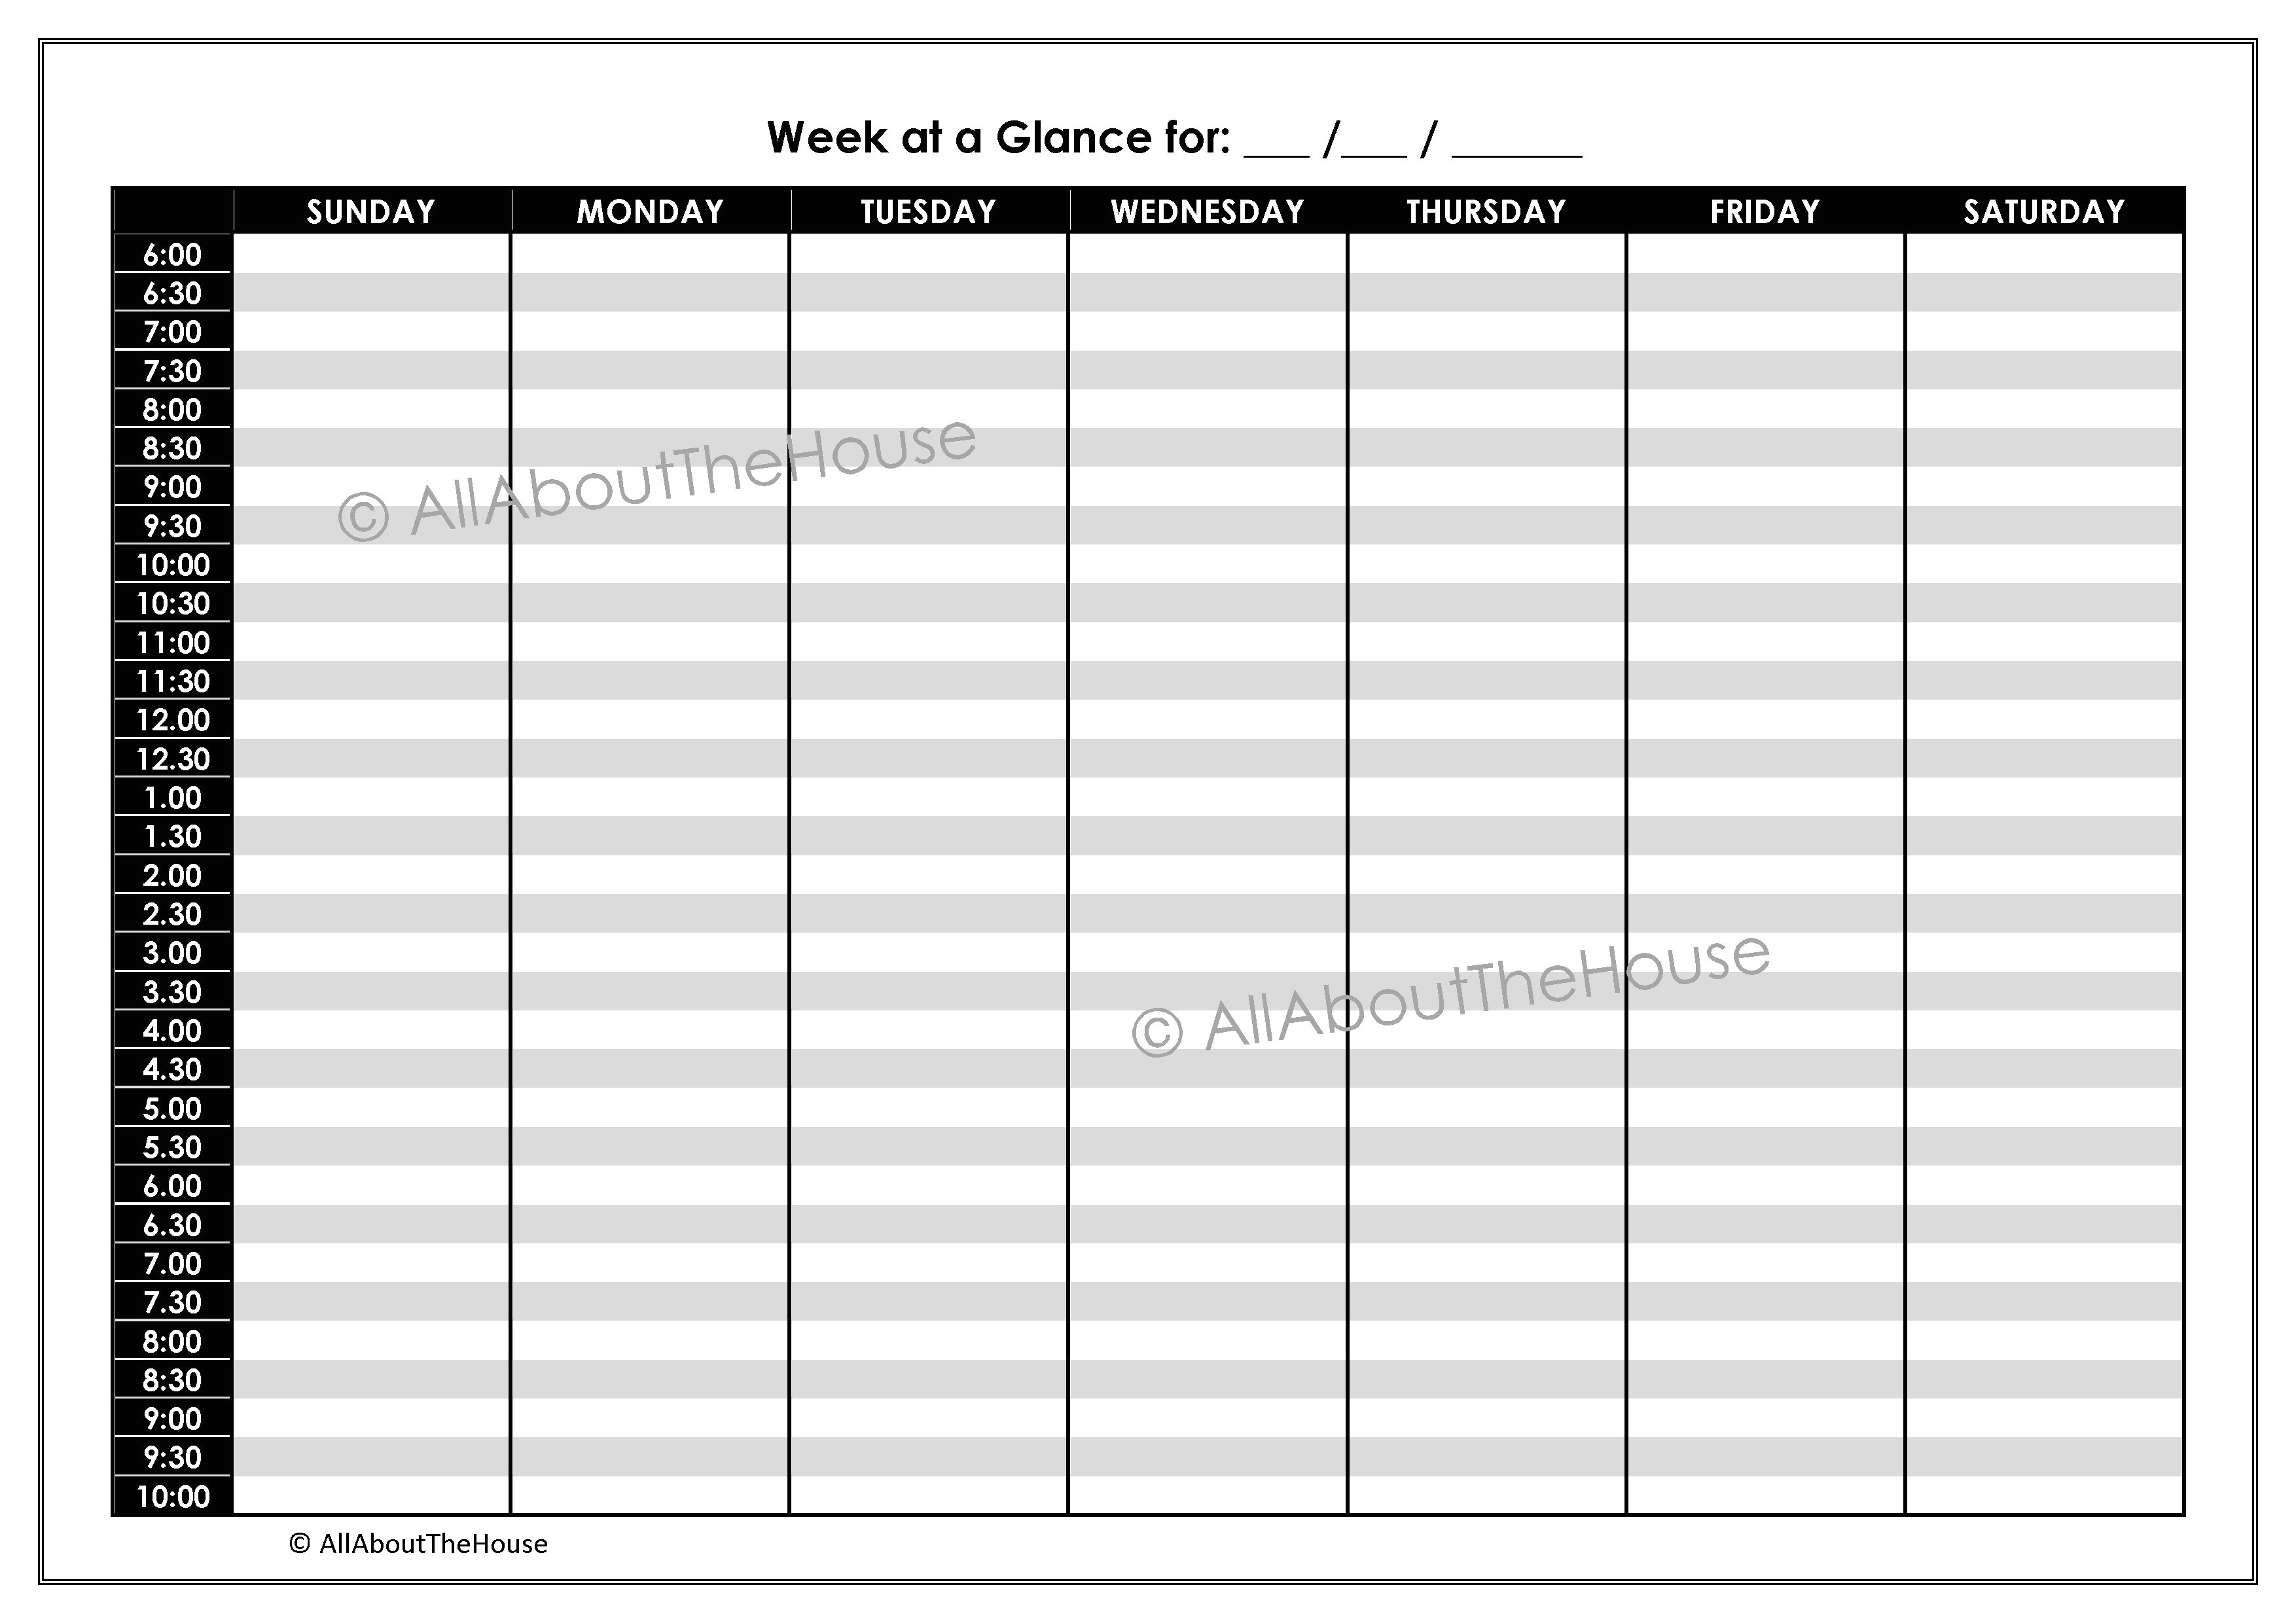 Calendar at A Glance Template 8 Best Images Of Week at A Glance Calendar Printable